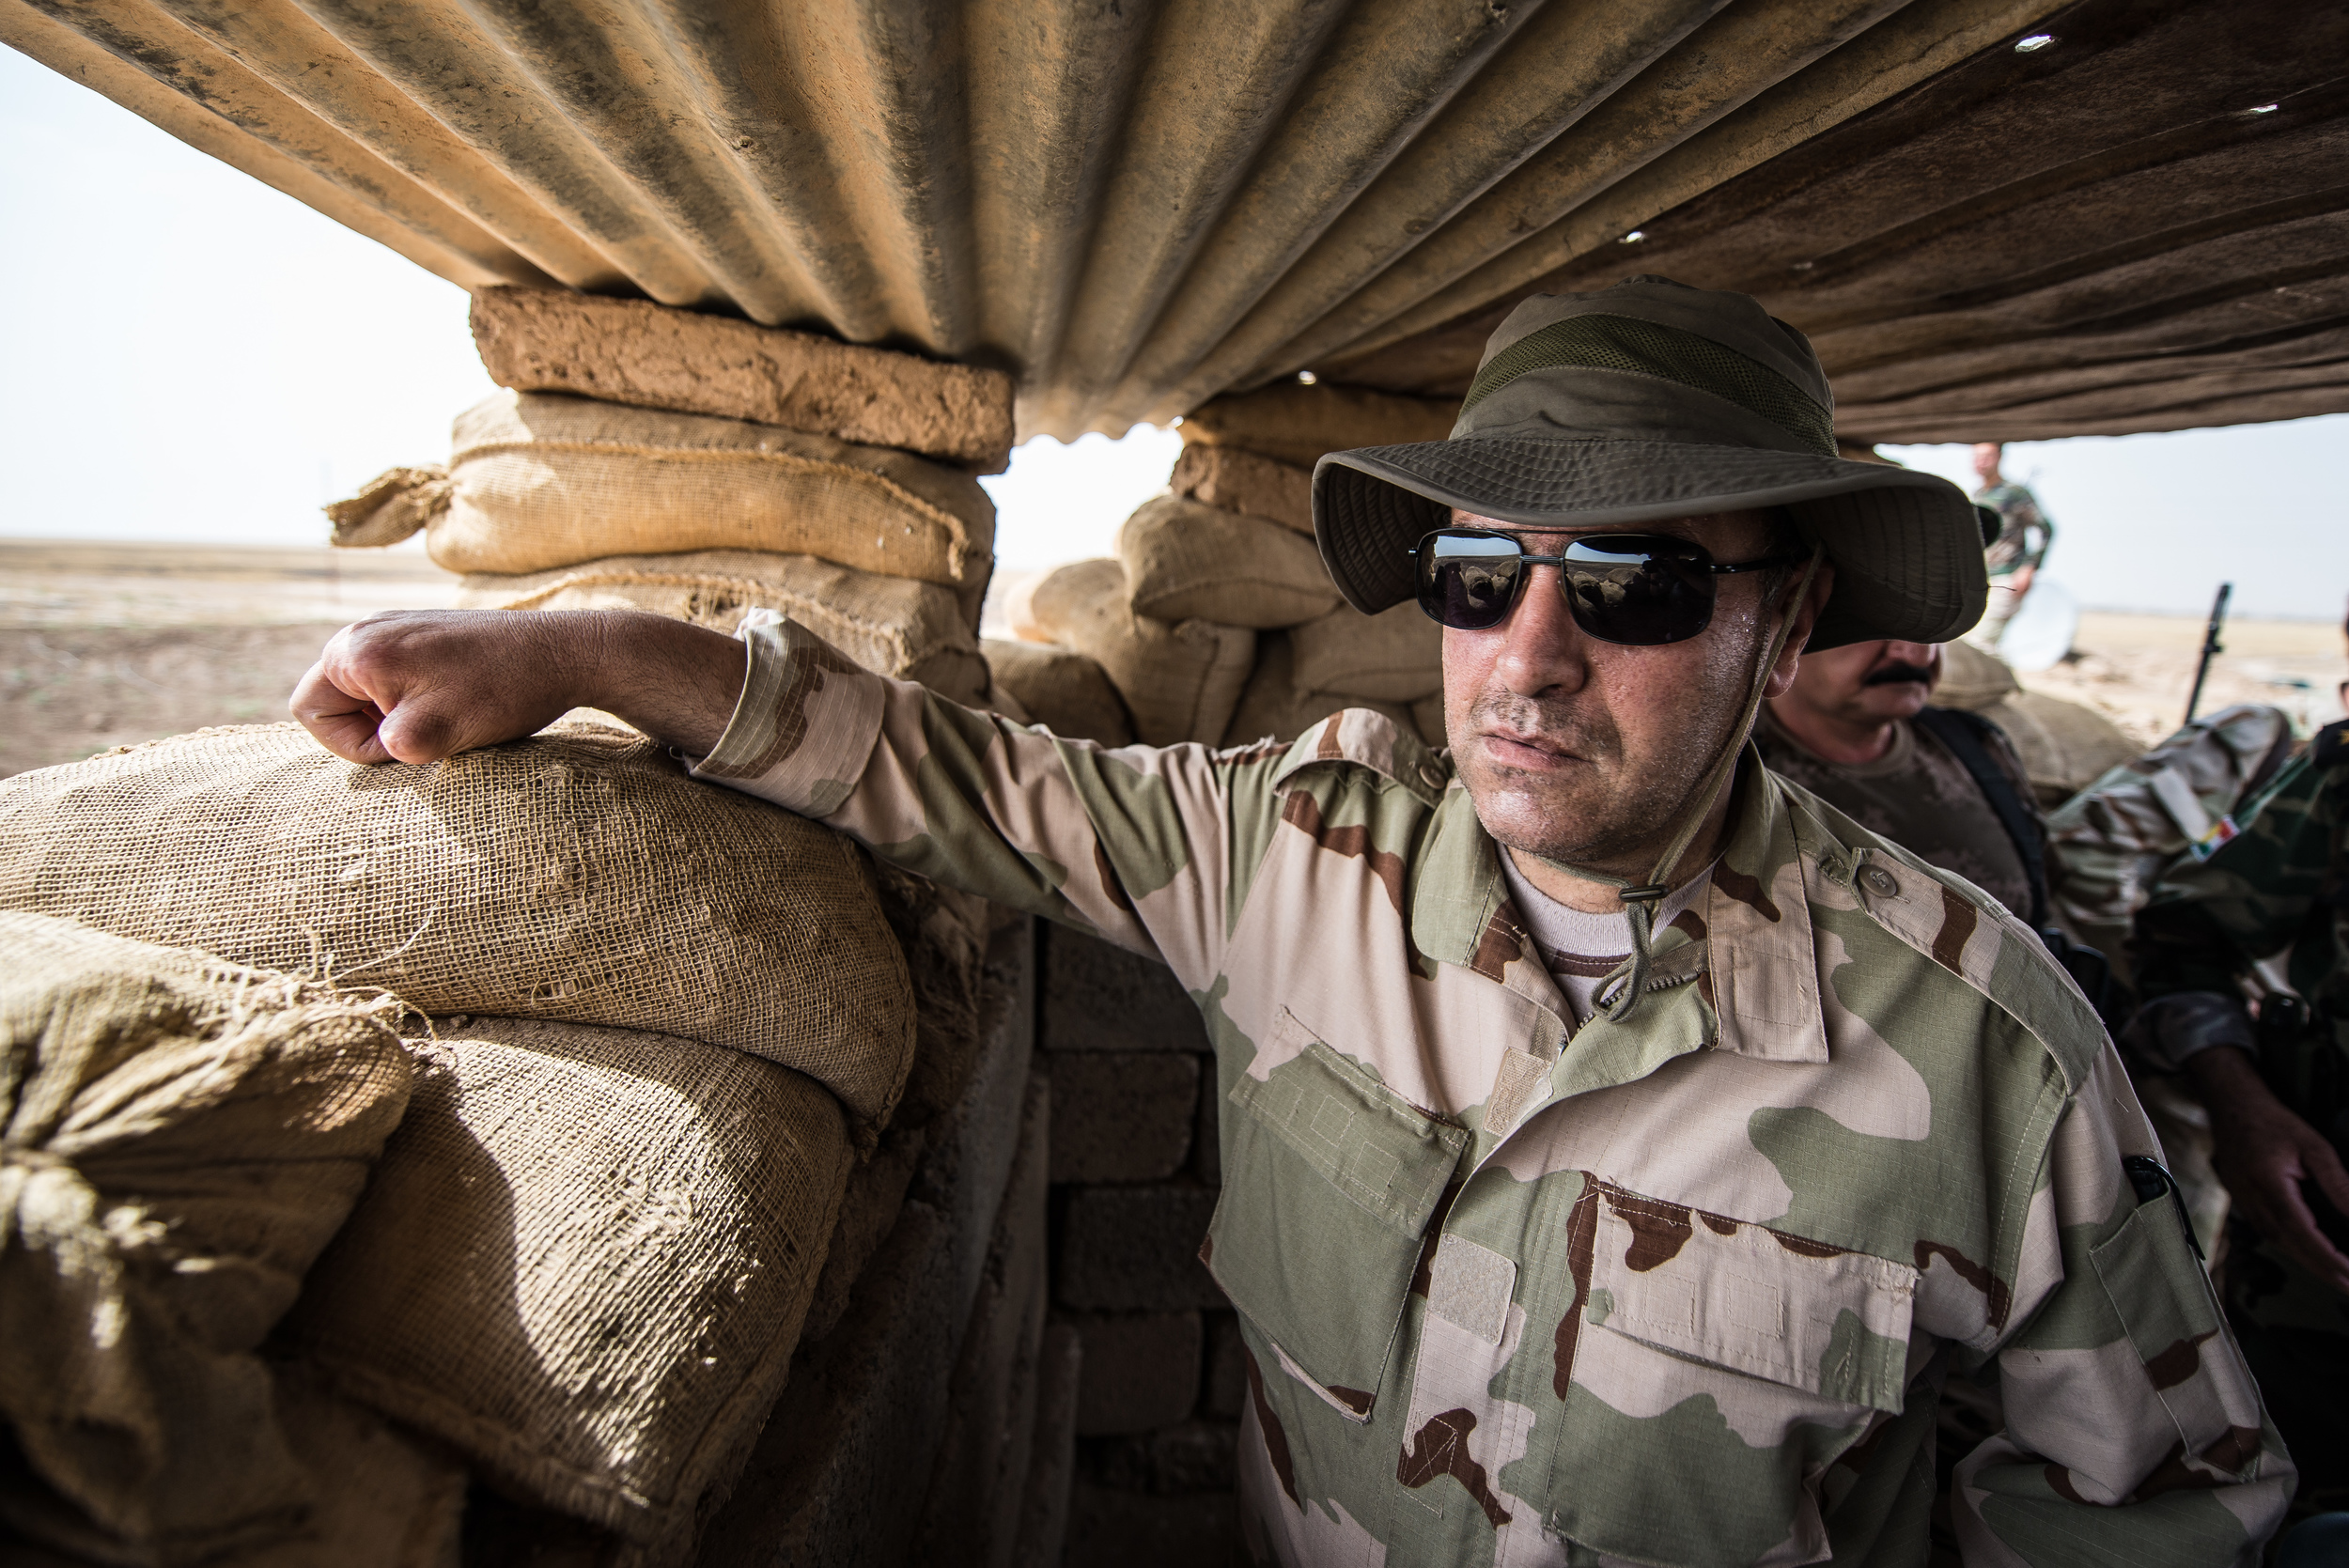  A peshmerga General in a fortified trench position. 